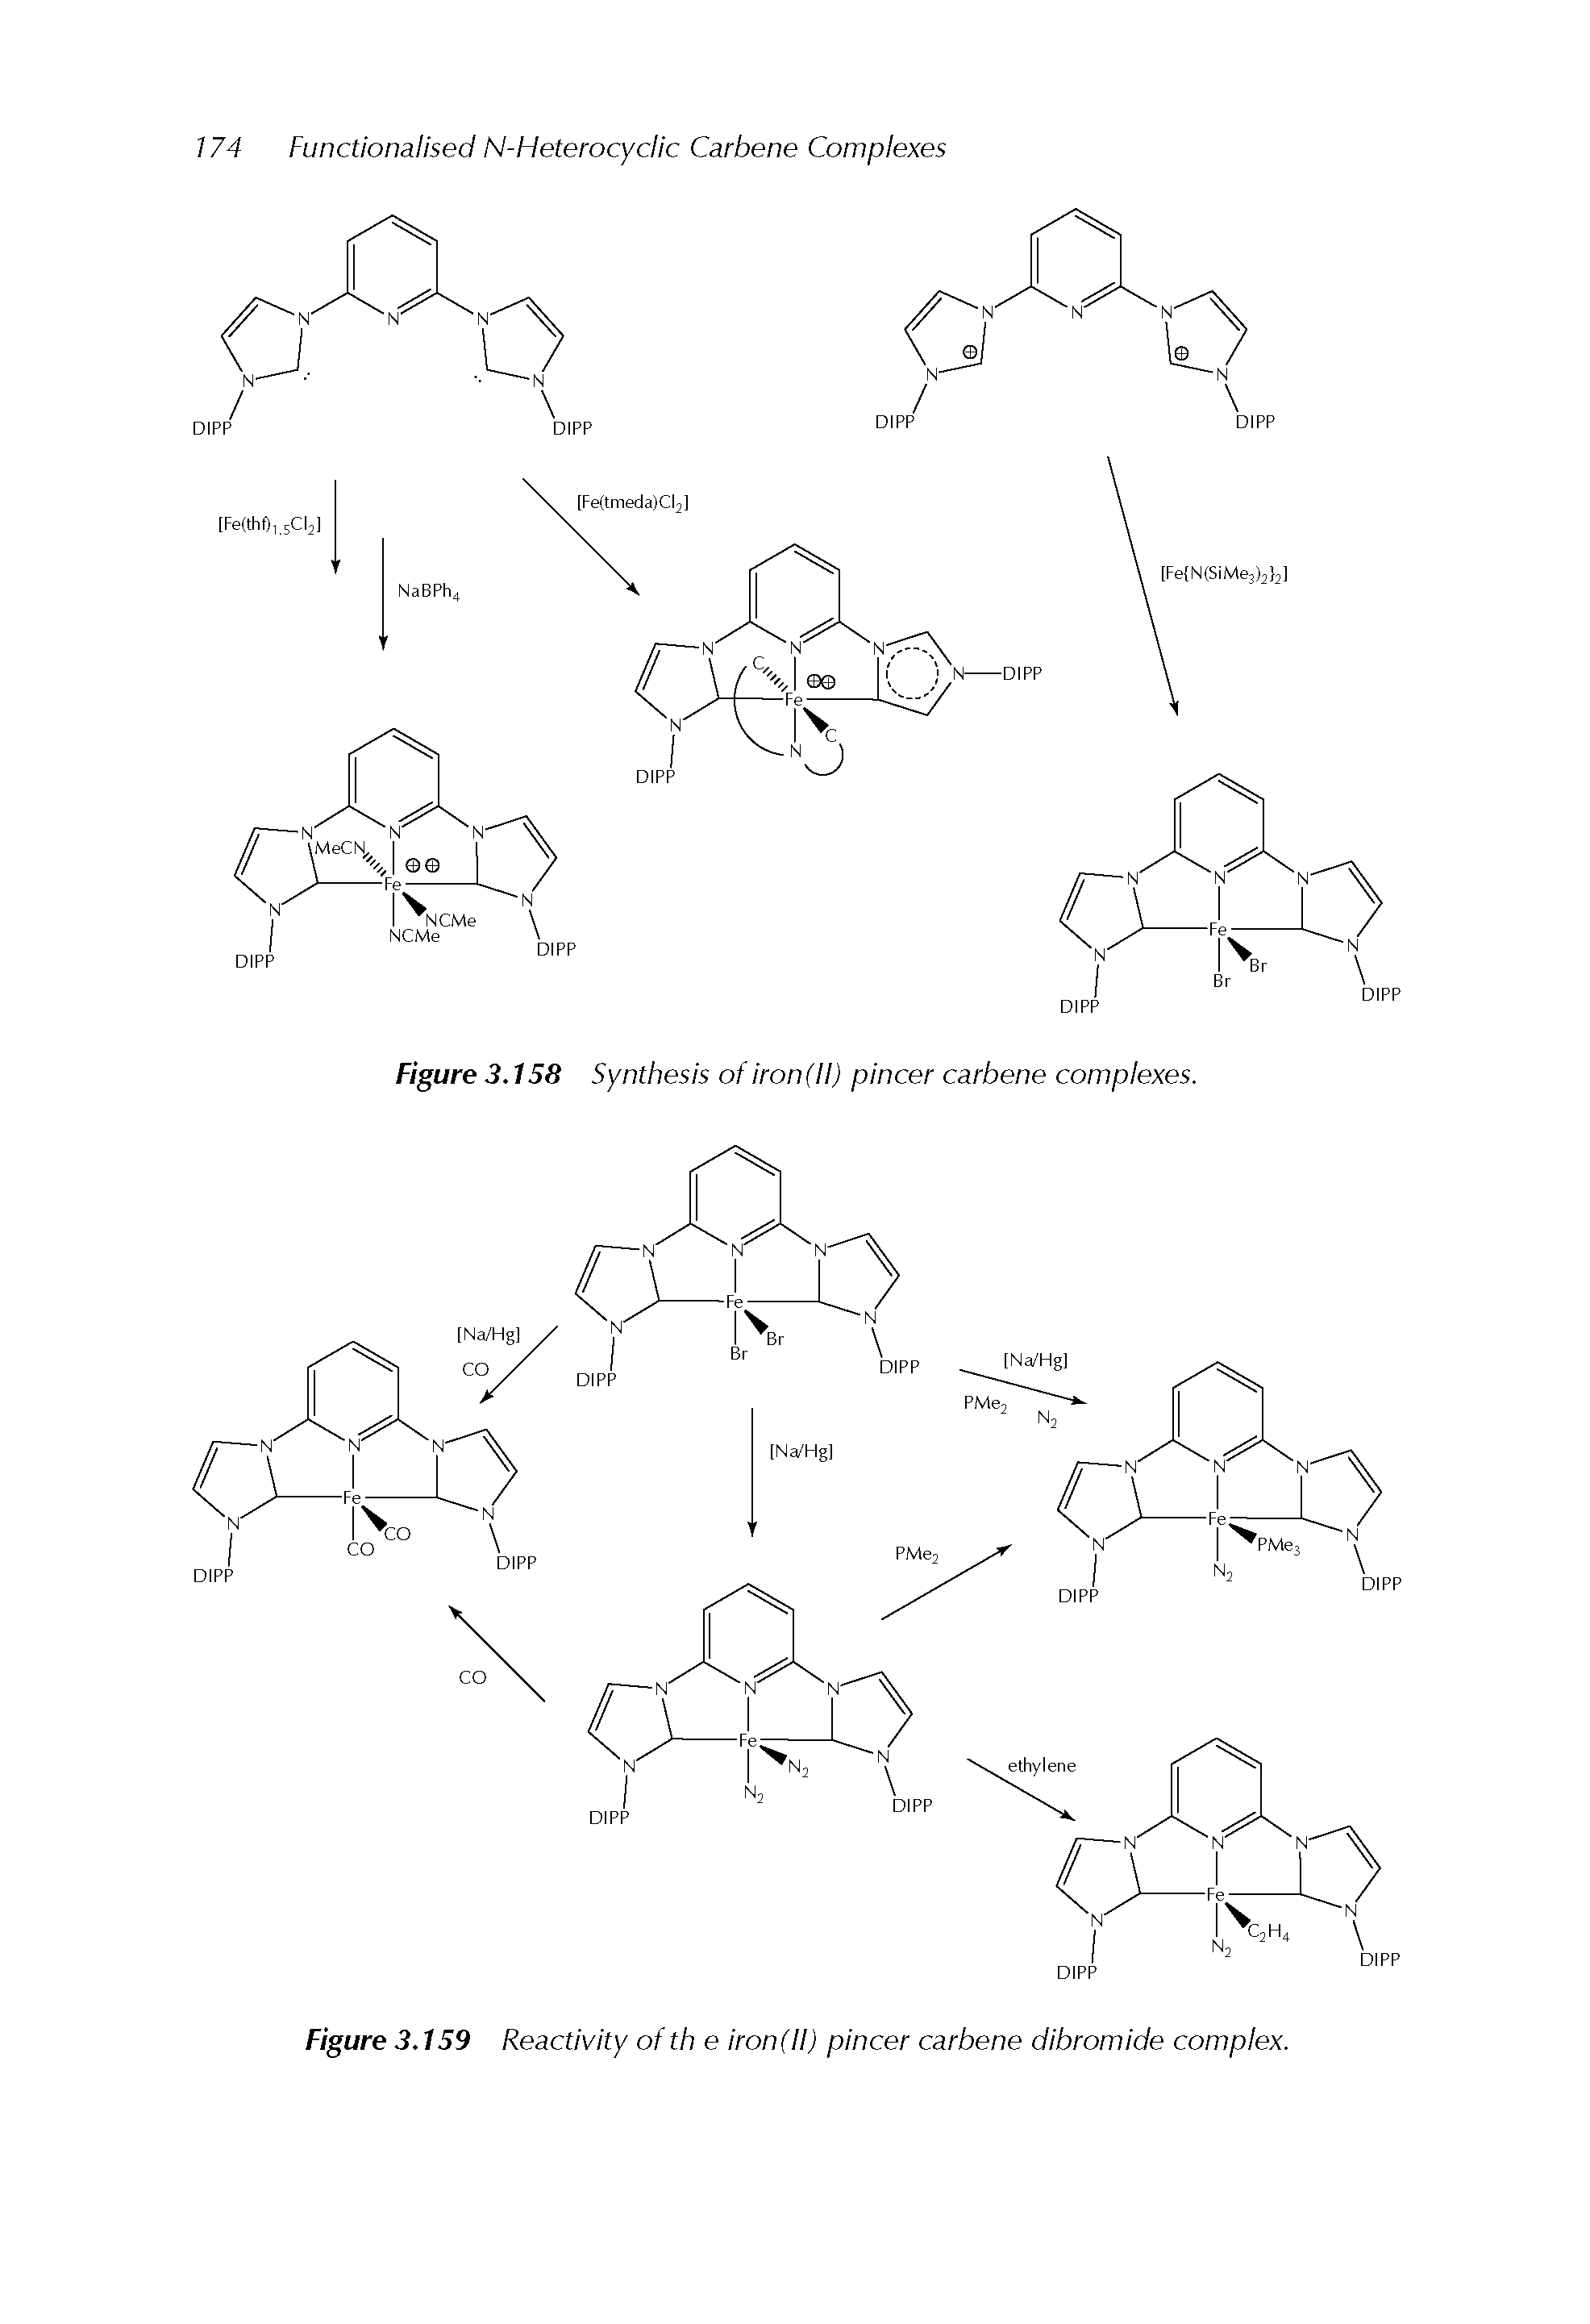 Figure 3,158 Synthesis of iron(ll) pincer carbene complexes.